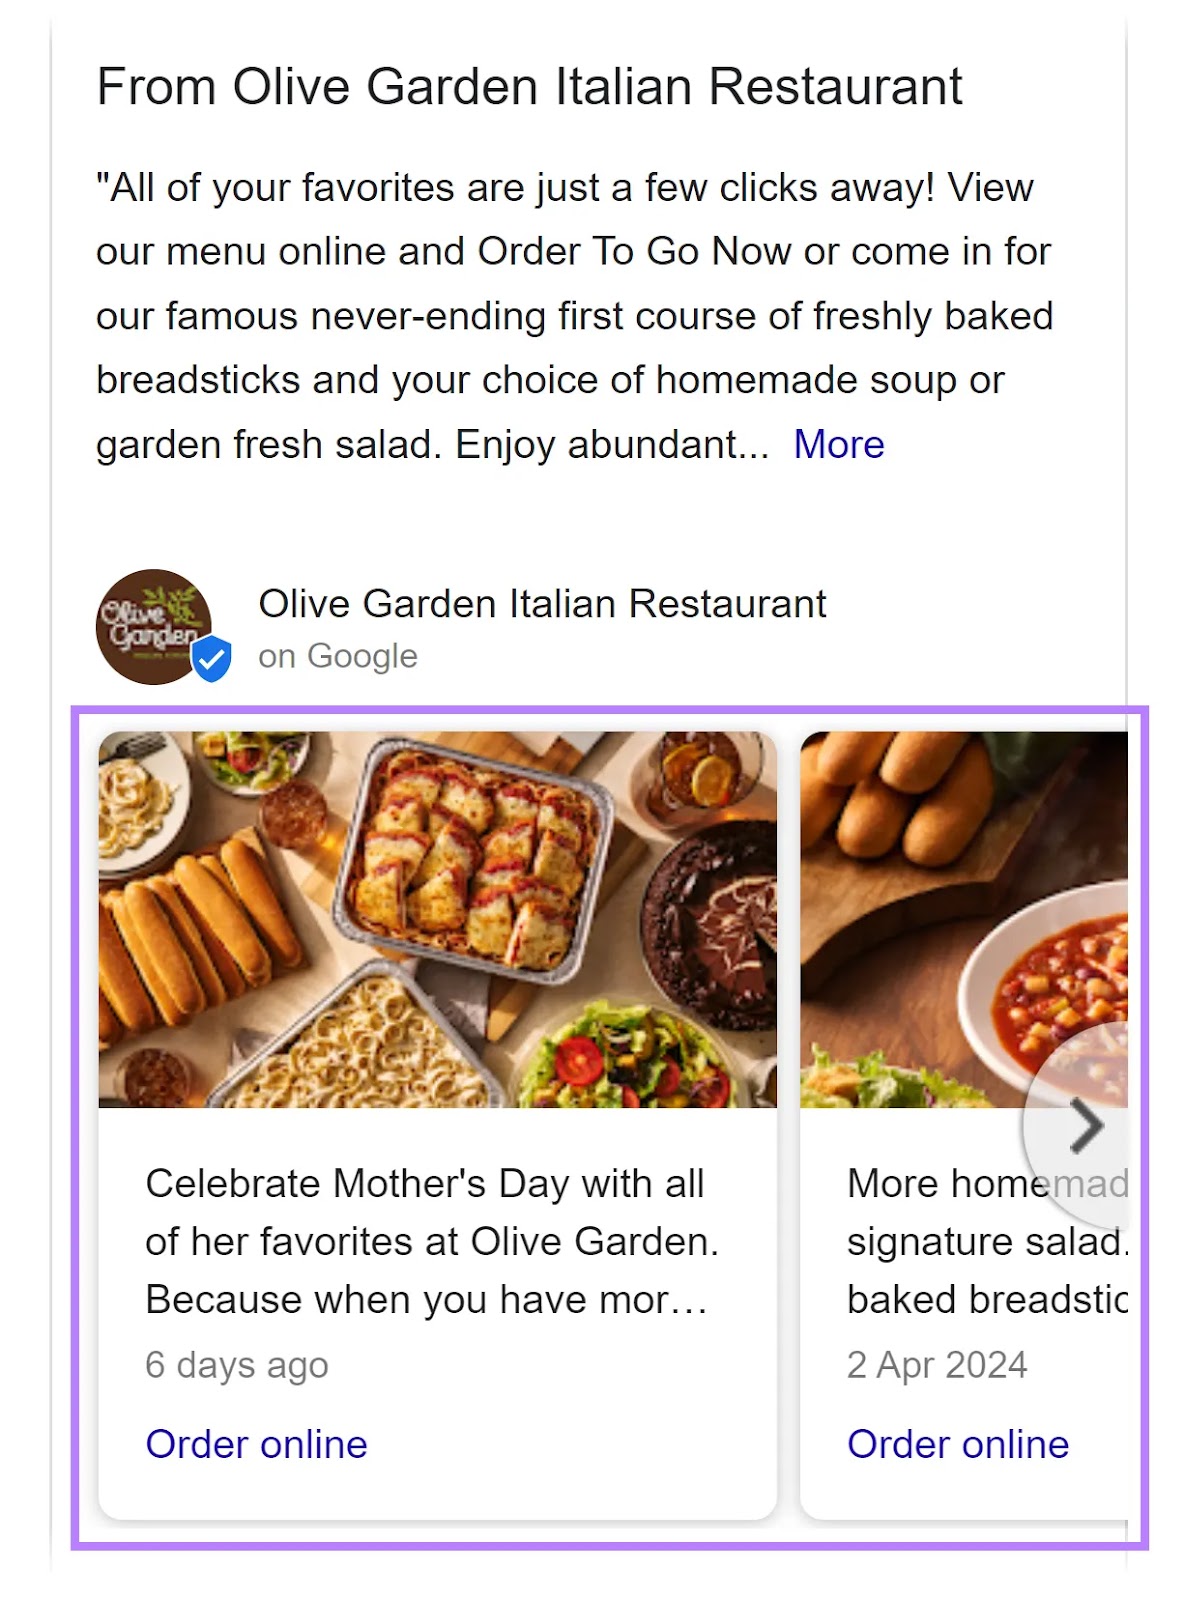 Google Business Profile Posts section of "Olive Garden Italian Restaurant" with the "Order online" CTA button.